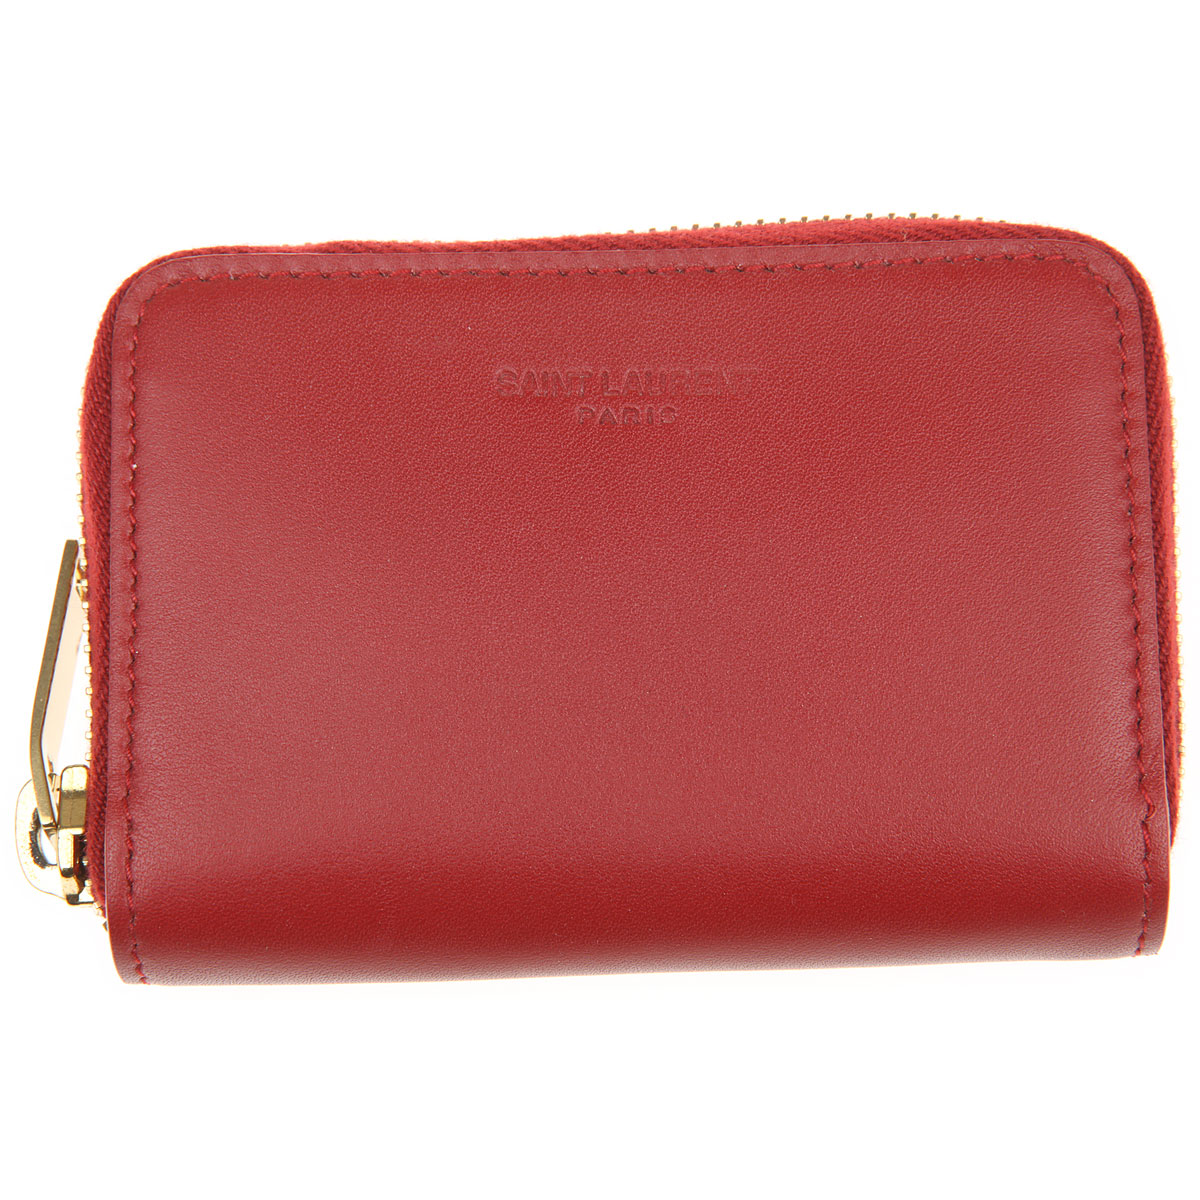 Womens Wallets Yves Saint Laurent, Style code: 326598-rosso-